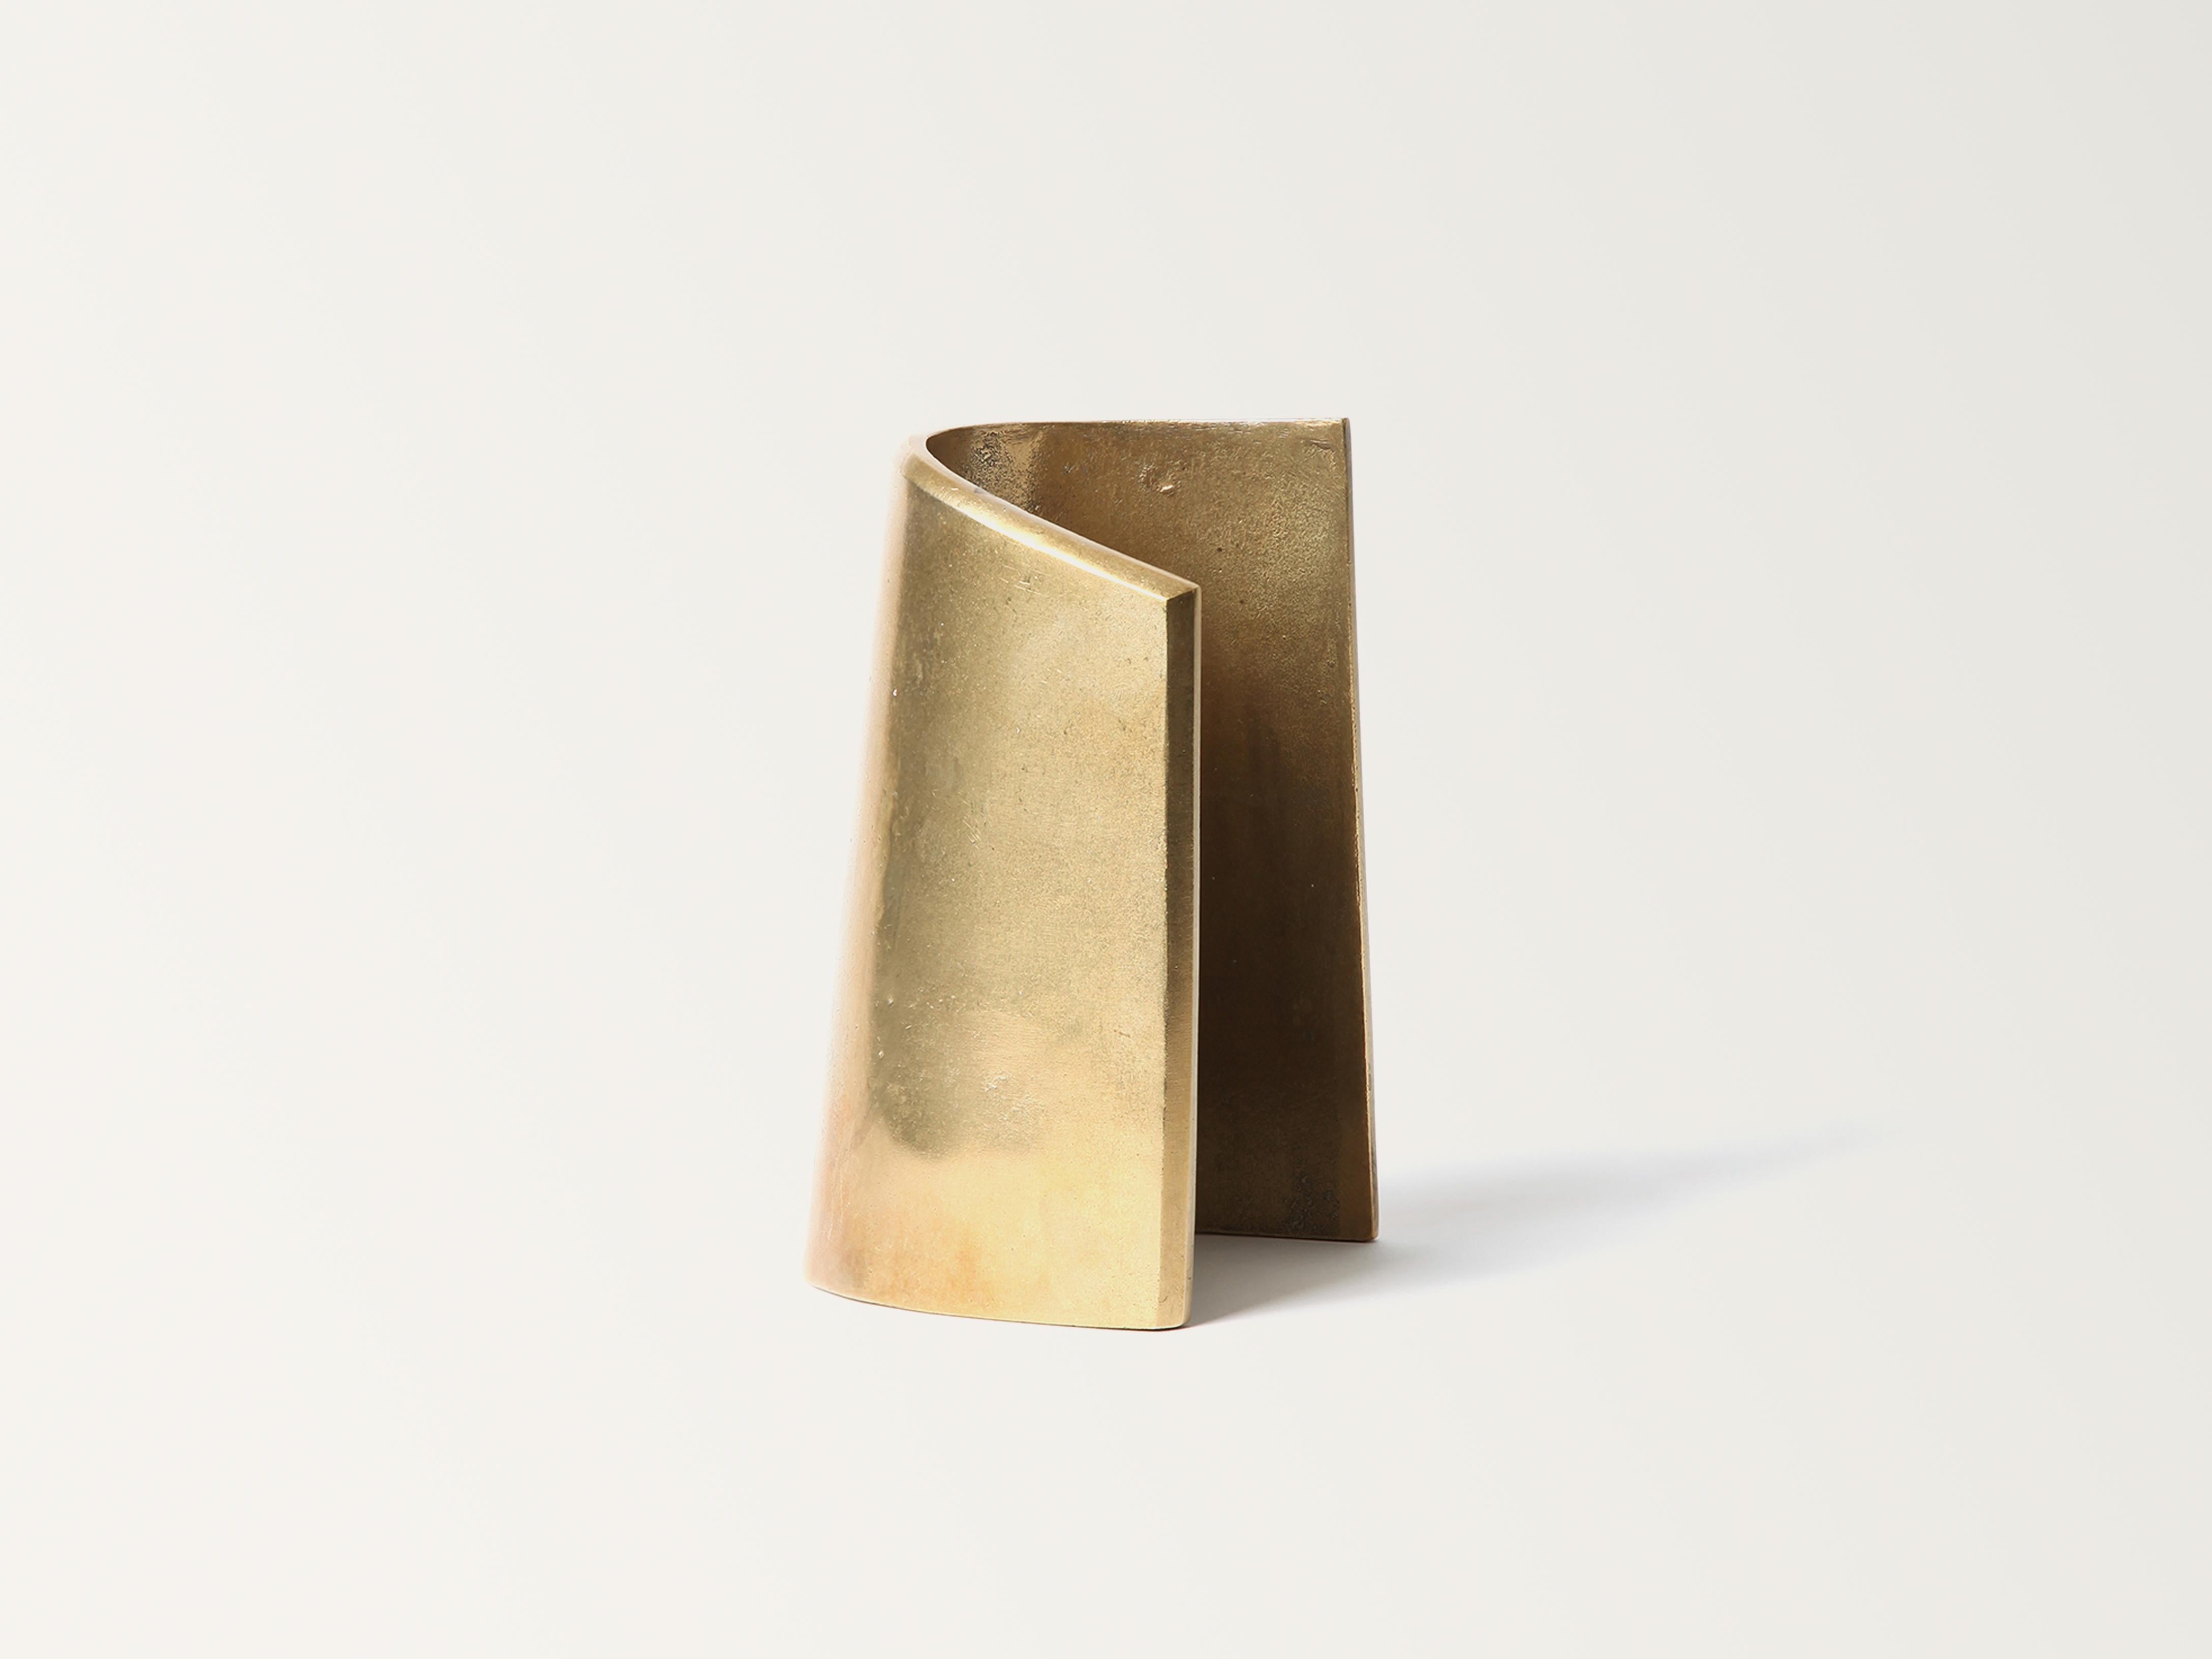 Brass Fold Bookend by Stem Design
Dimensions: D 11 x W 11 x H 18 cm.
Materials: Brass.
Finish: Tumbled and burnished.
Weight: 2,5 kg.

Finished and assembled by hand in India. Please contact us. 

Fold bookend captures the recurring act of turning a